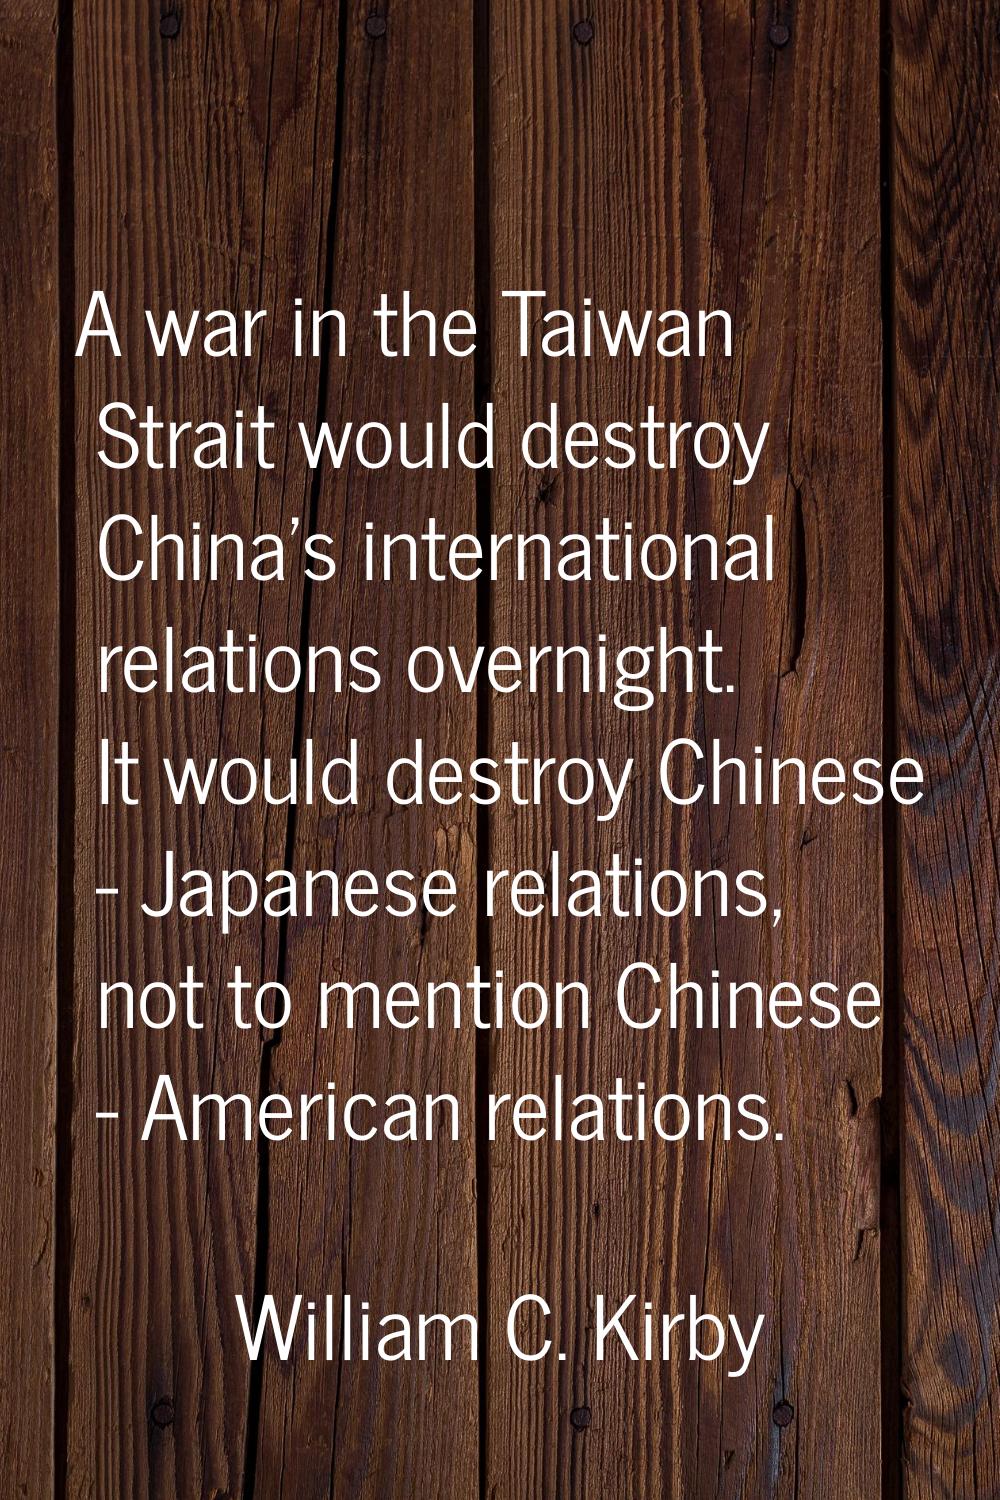 A war in the Taiwan Strait would destroy China's international relations overnight. It would destro